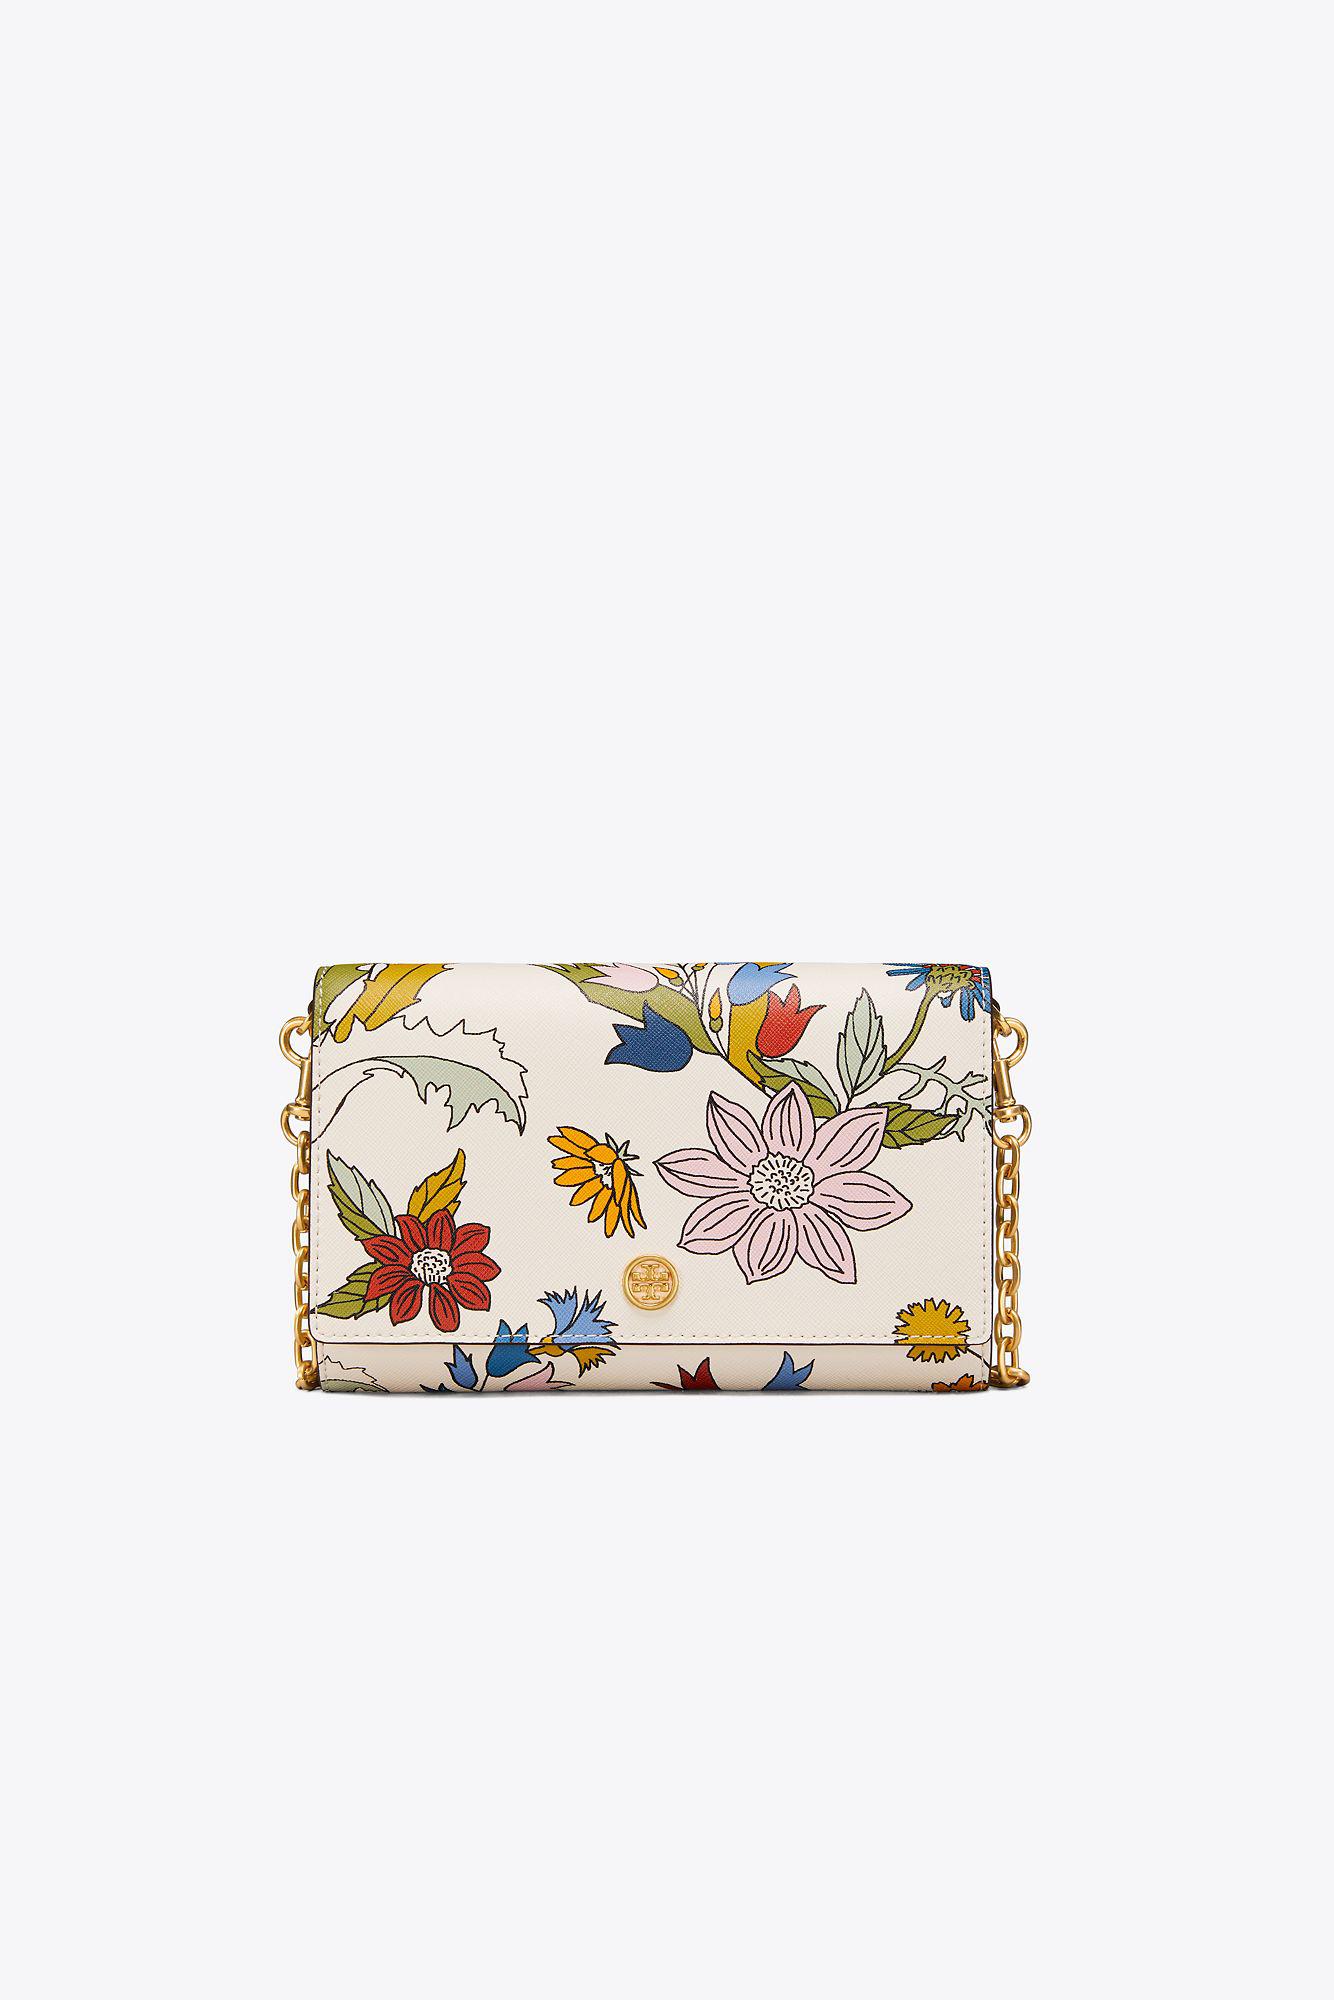 Tory+Burch+Mixed+Floral+Afternoon+Tea+Handkerchief+Print+Kira+Chain+Wallet+Bag  for sale online